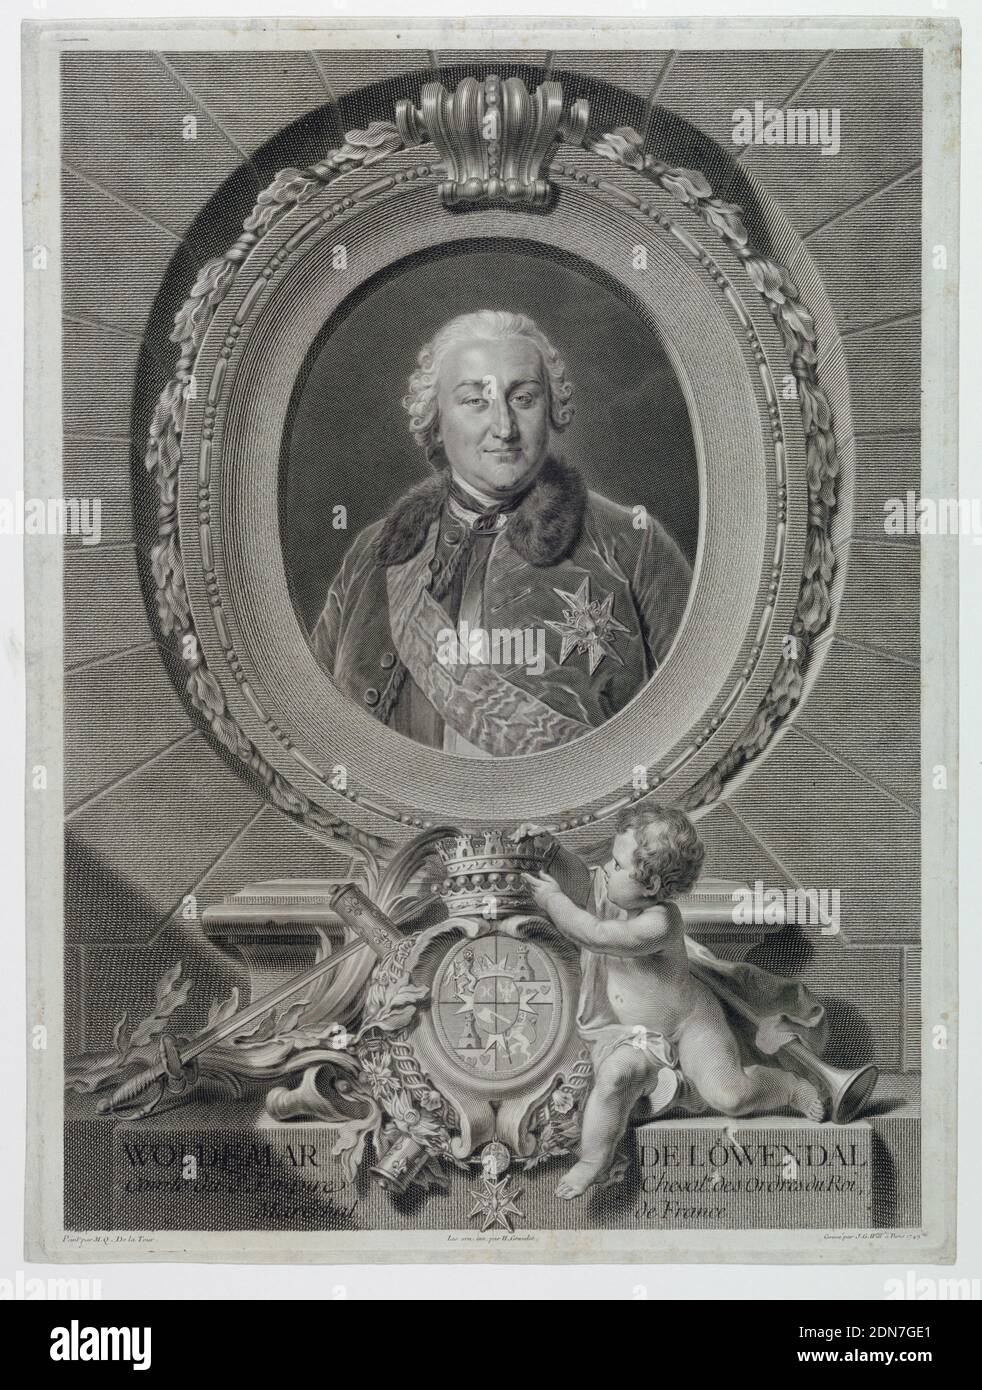 Portrait of Field Marshal Count Waldemar de Loewendal (1700-1755), Johann Georg Wille, German, active France 1715–1808, Maurice-Quentin de La Tour, 1704 – 1788, Gravelot, French, 1699 - 1773, active in England, Engraving on paper, Bust-length portrait of a man, facing the spectator. Enclosed in wide oval frame. Arms and title below. Signed and dated in margin, lower right: 'Gravé par J. G. Will á Paris 1749;' lower center 'Les orn. inv. par H. Gravelot.', Paris, France, 1749, Print Stock Photo